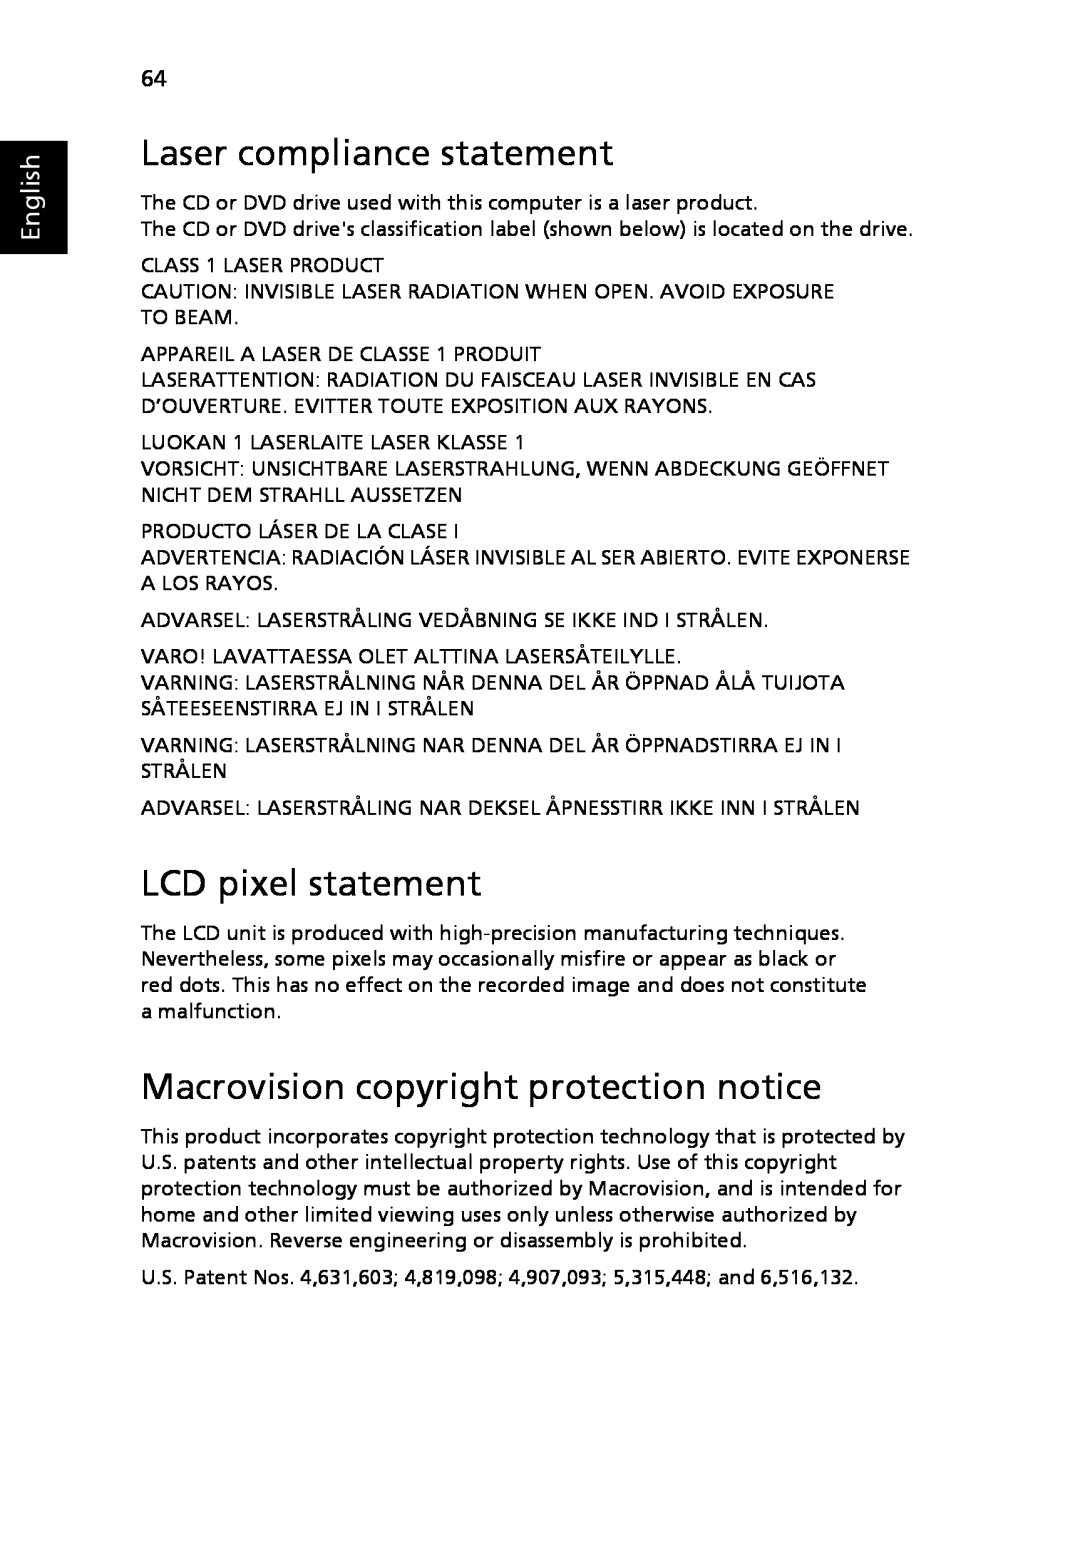 Acer 3630 manual Laser compliance statement, LCD pixel statement, Macrovision copyright protection notice, English 